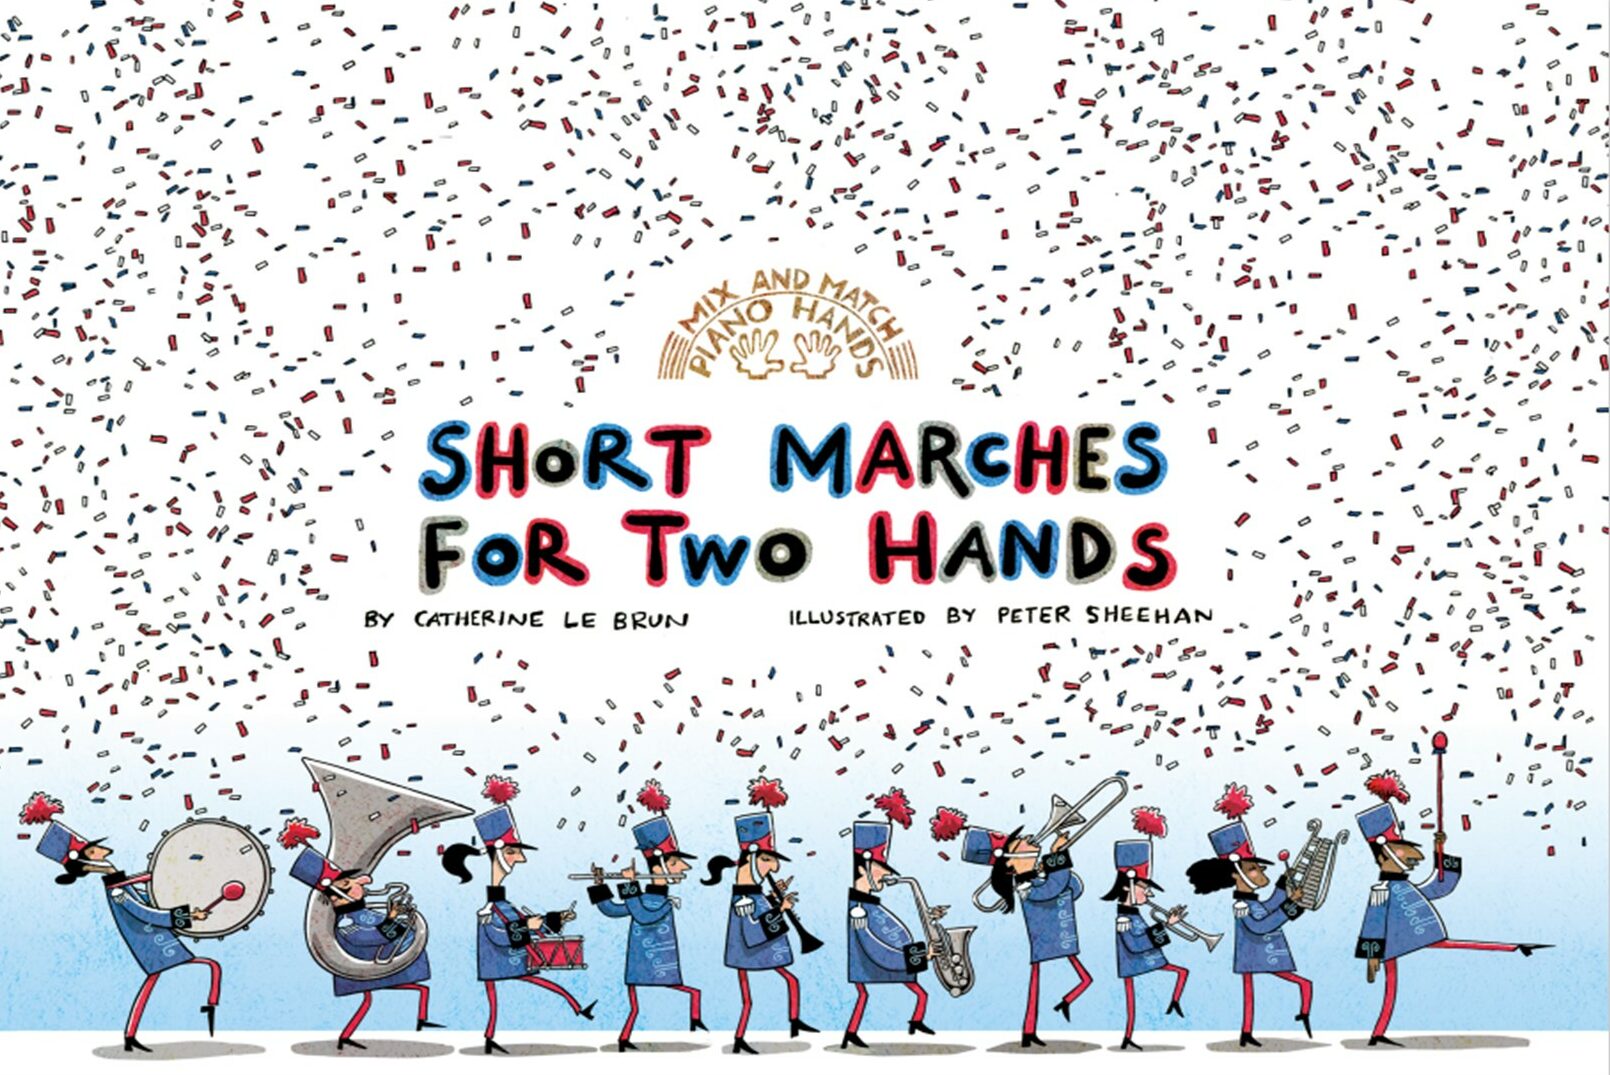 Short Marches for Two Hands - cover art